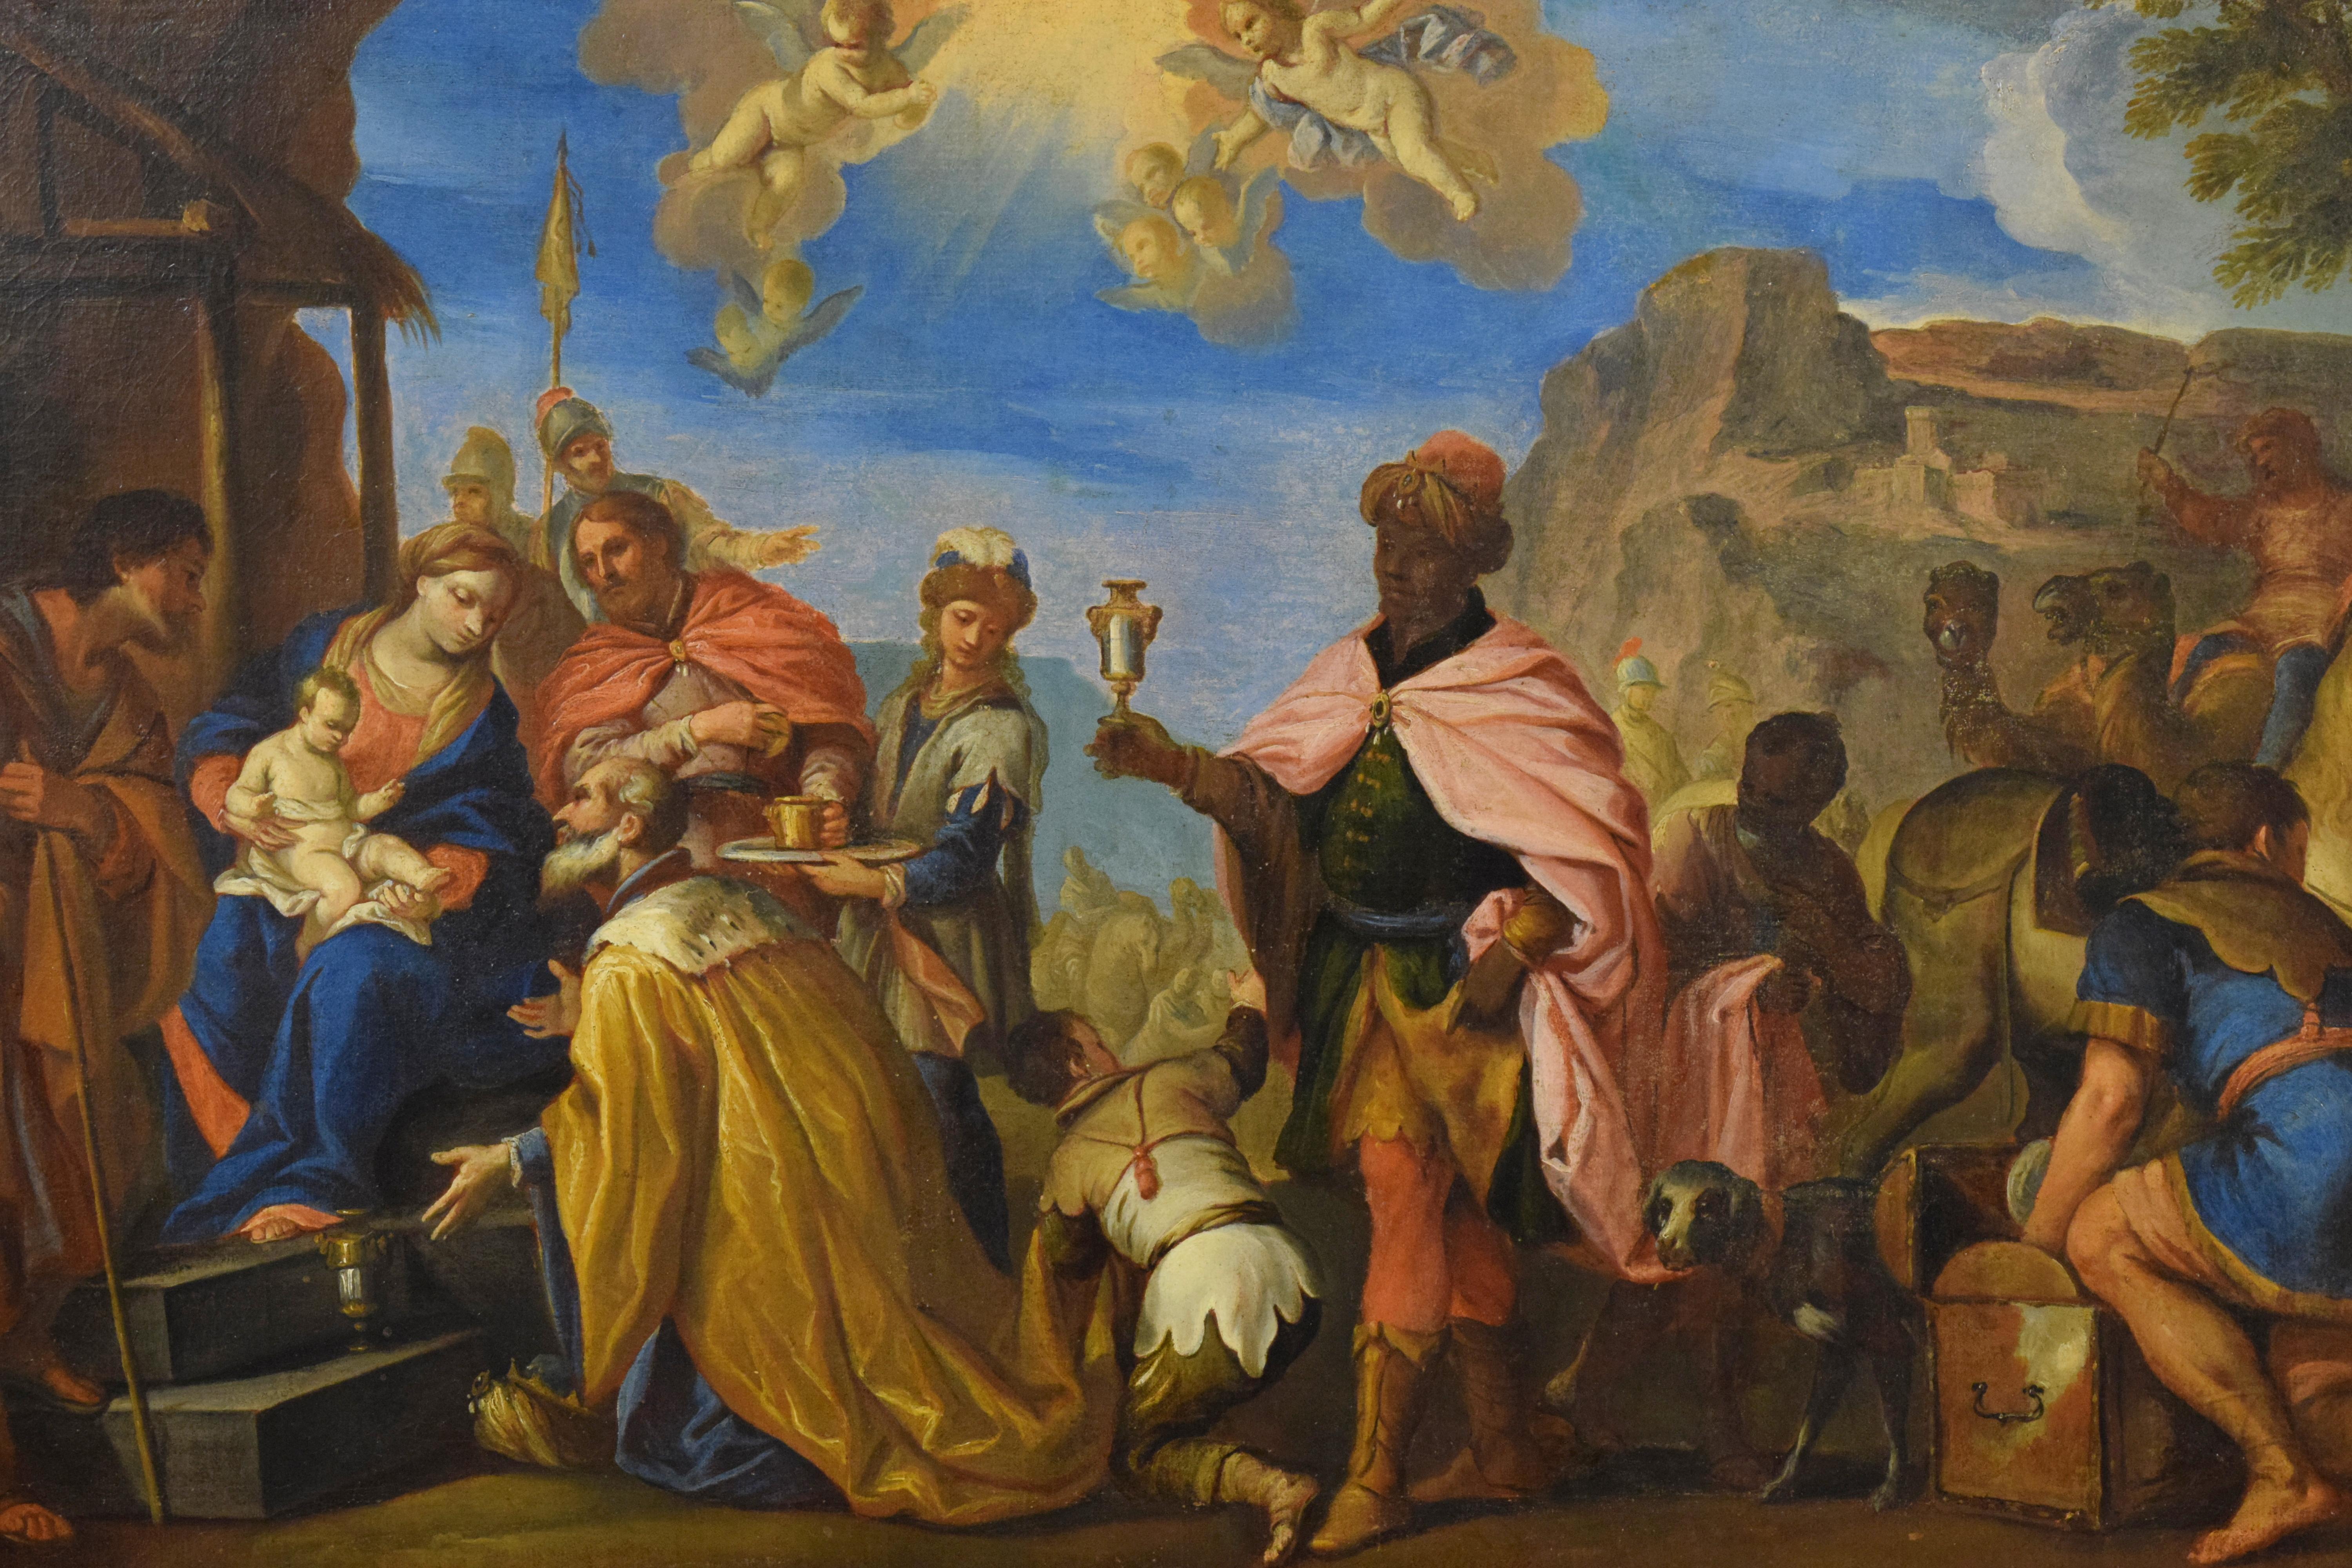 Baroque 17th Century Painting by Italian School, Adoration of the Magi